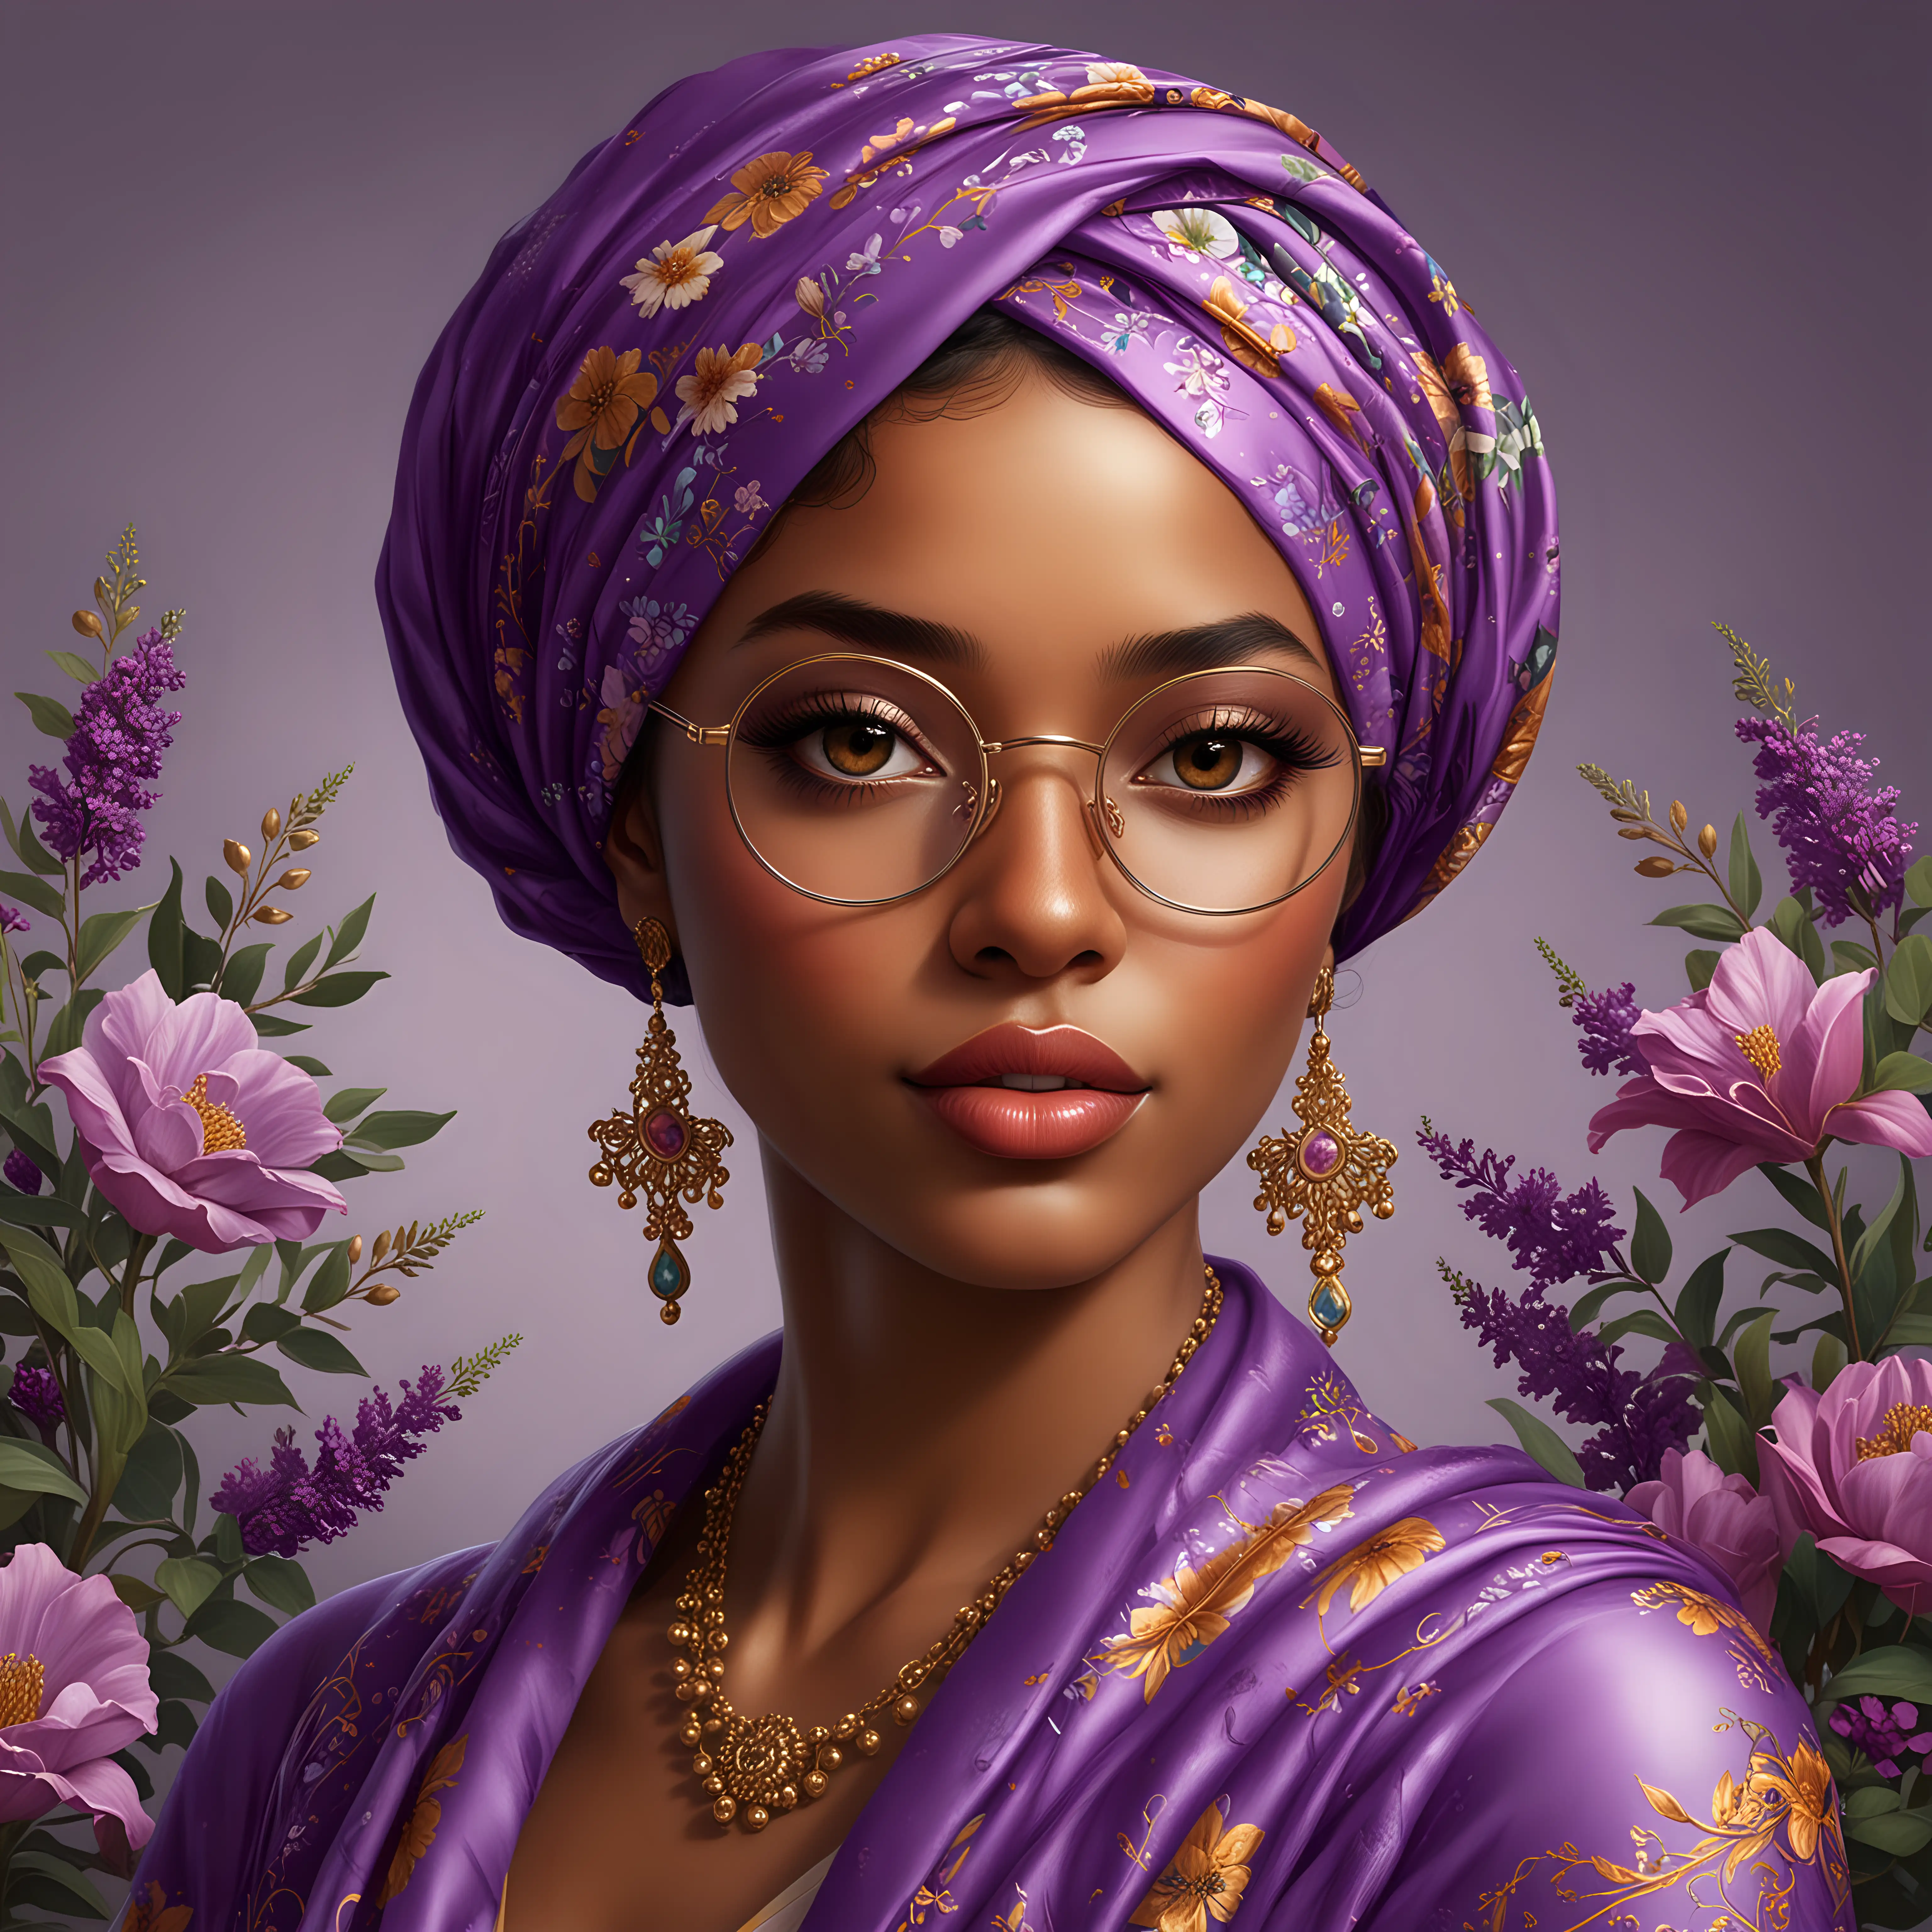 Sophisticated Female Portrait with Vibrant Headscarf and Elegant Glasses